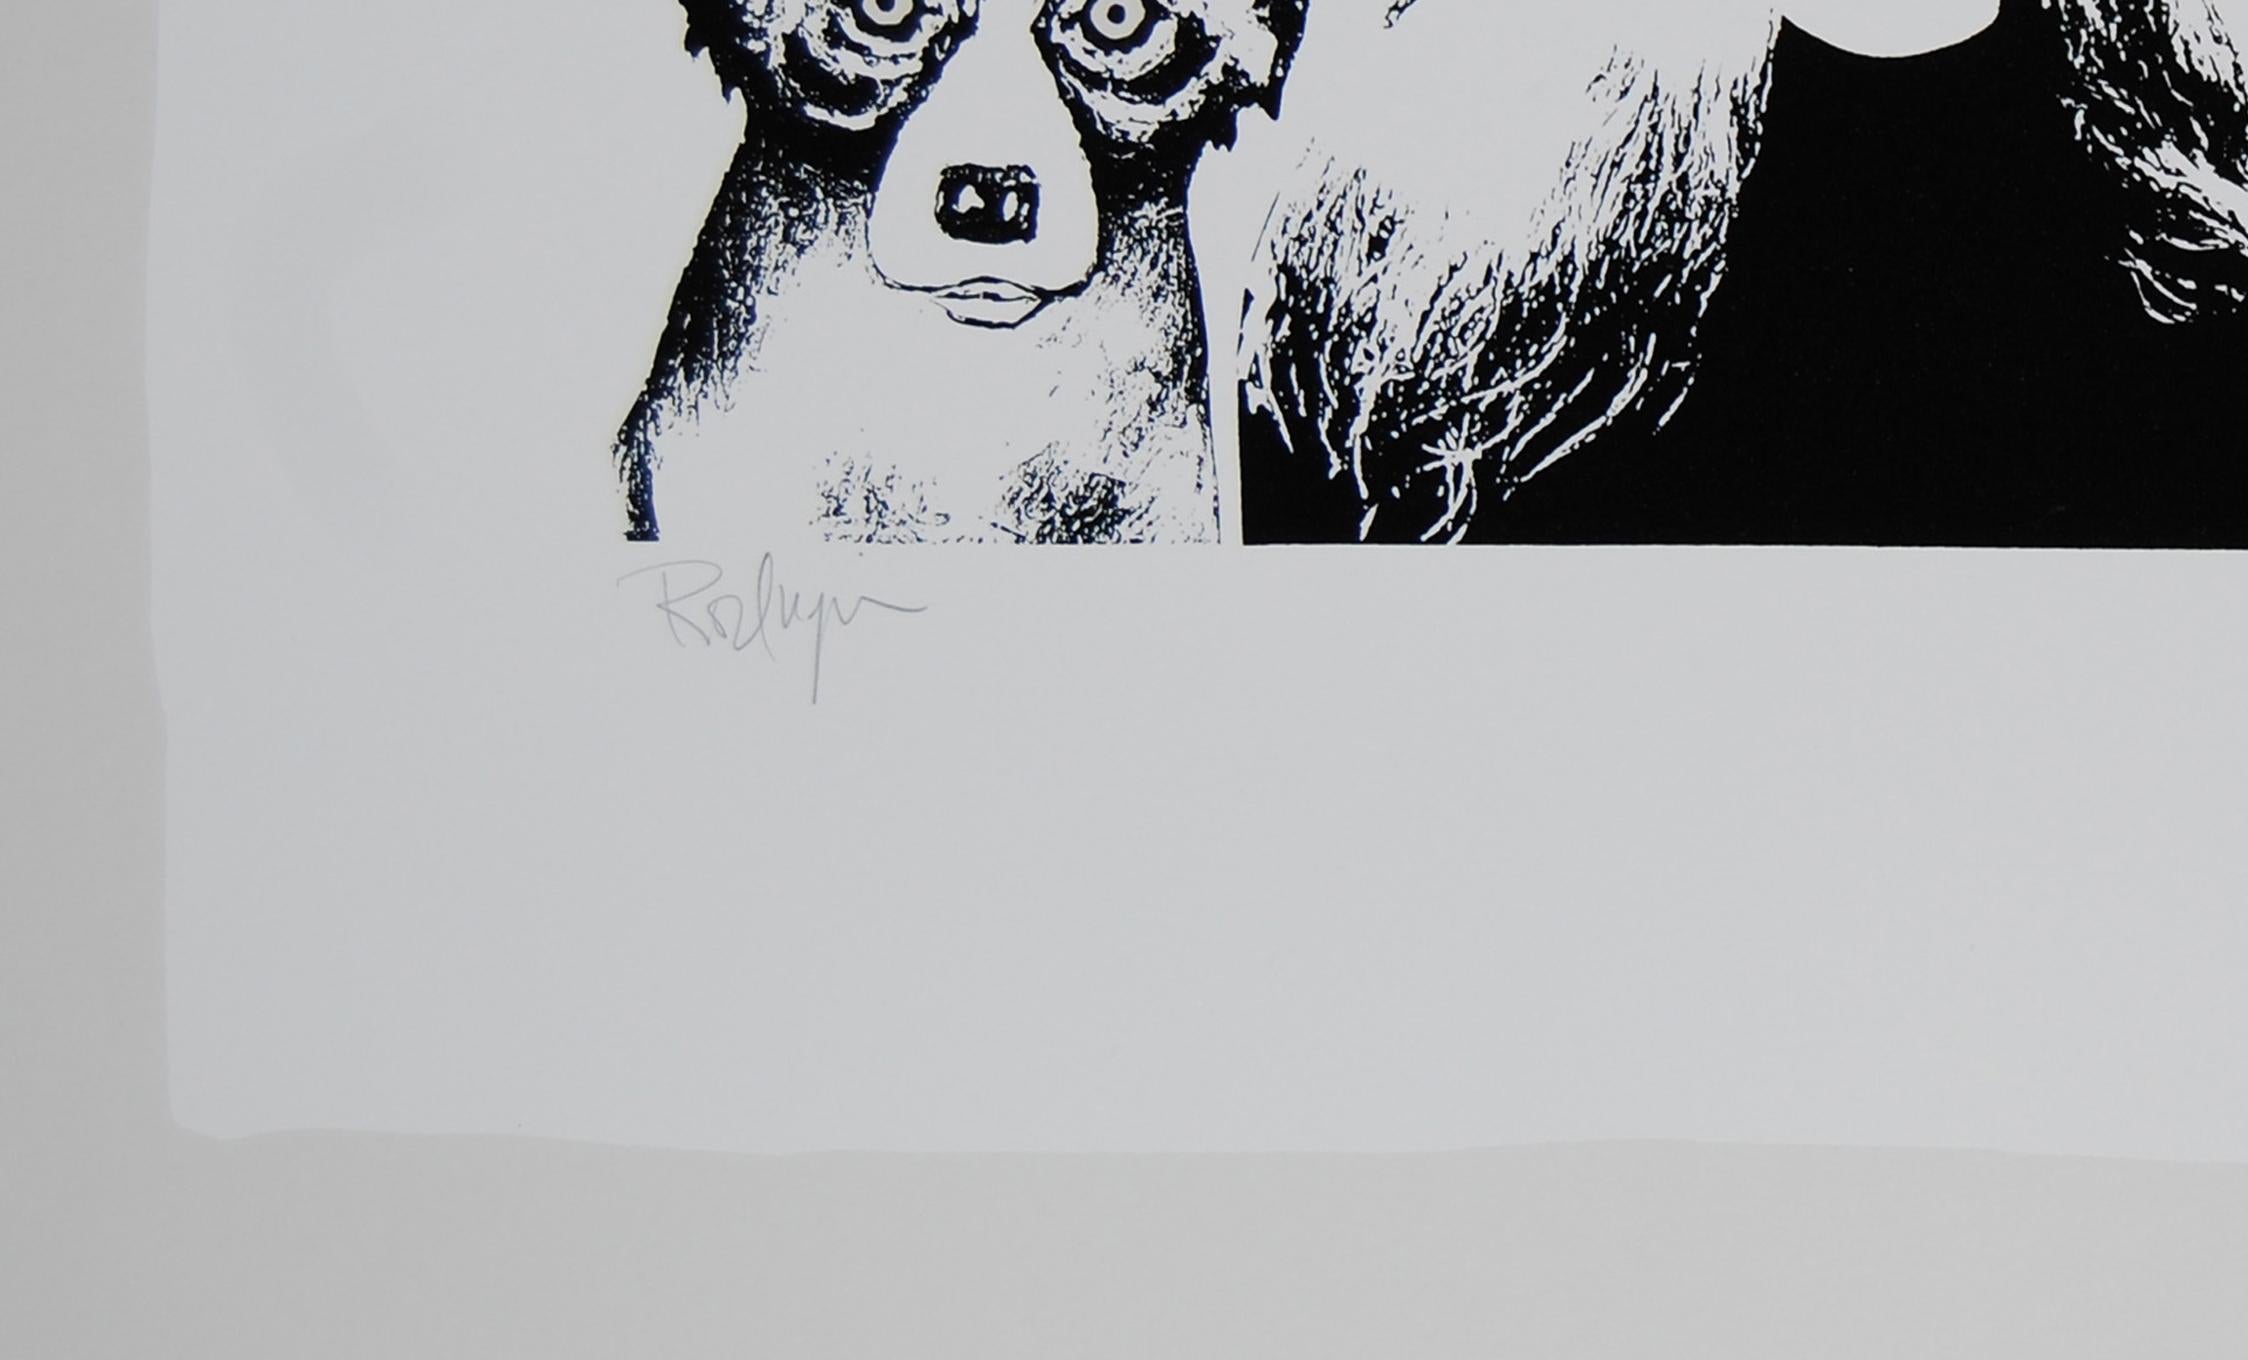 This Blue Dog work consists of a white background.  There is a woman with dog ears and red lipstick centered between 2 dogs.  The woman and dogs are painted in black & white with only the touch of red on her lips.  This pop art animal original